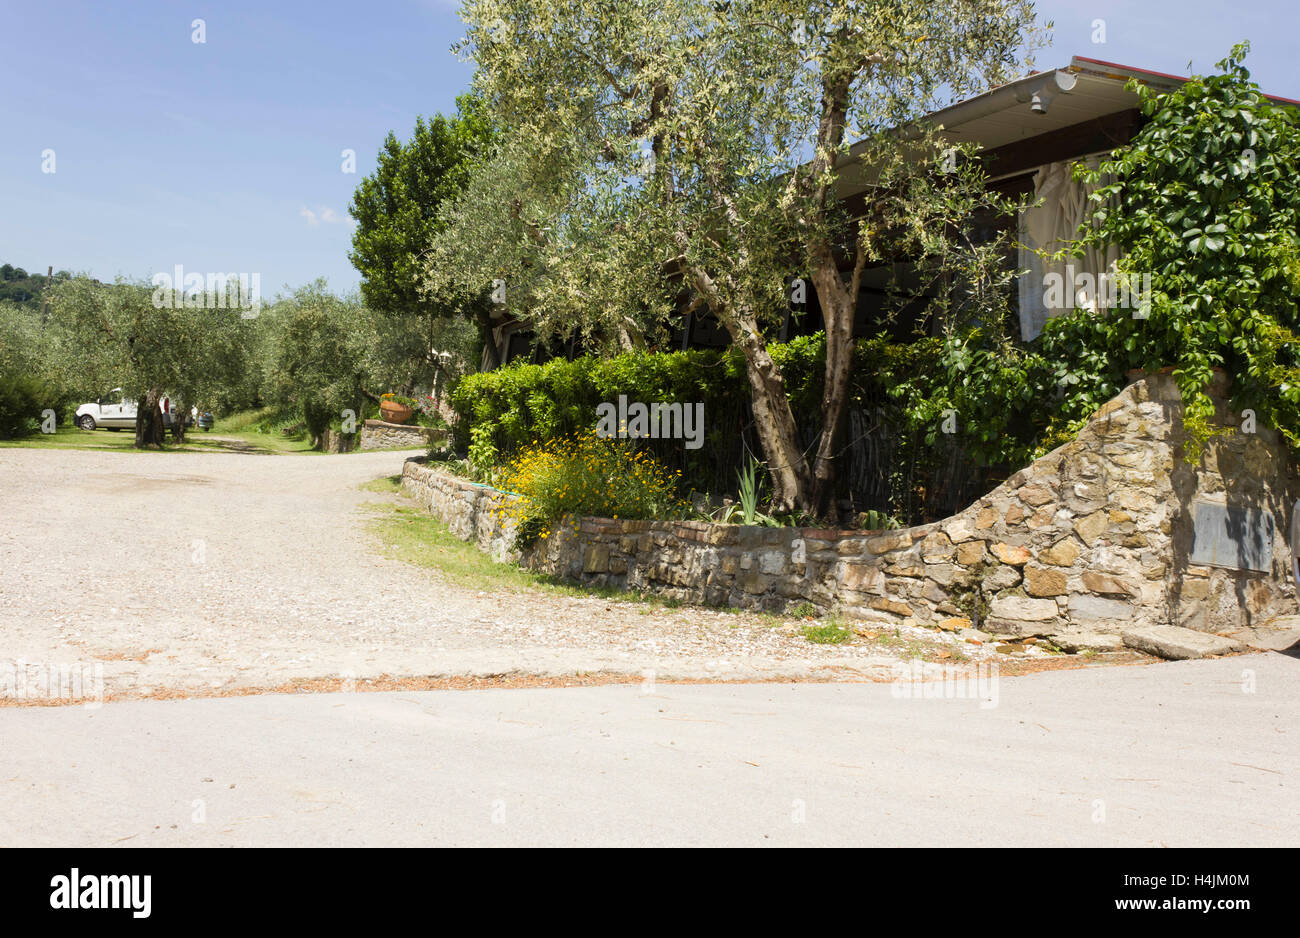 LASTRA A SIGNA, ITALY - MAY 21 2016: Outdoor view of Edy Piu Restaurant on Tuscan hills, surrounded by nature Stock Photo